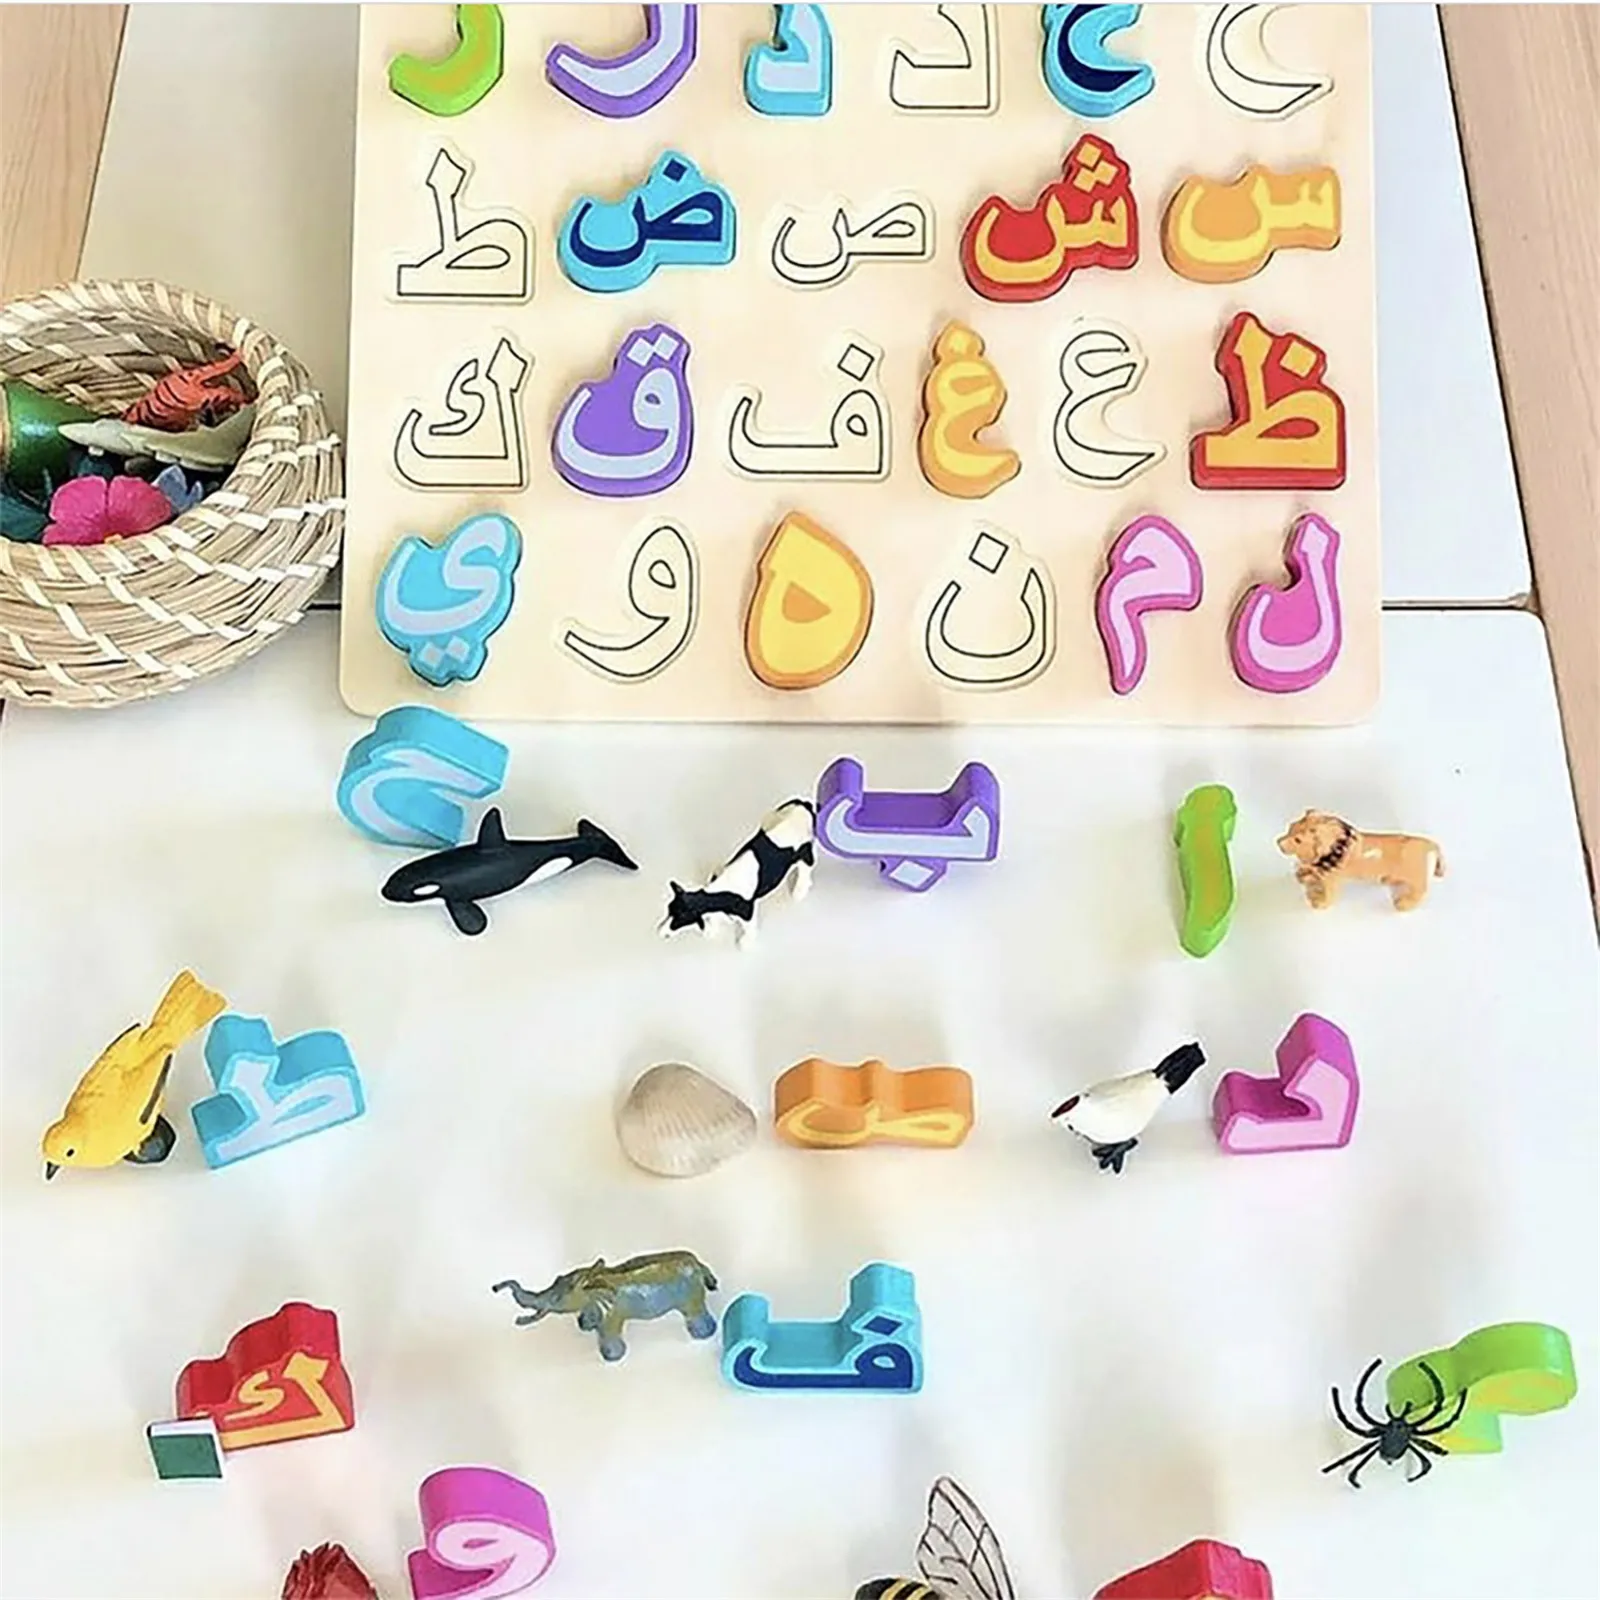 

2021 Hot Sale Arrival Kids Wooden Arabic Alphabet Number Jig-saw Puzzles Board Early Educational Preschool Toy For Baby